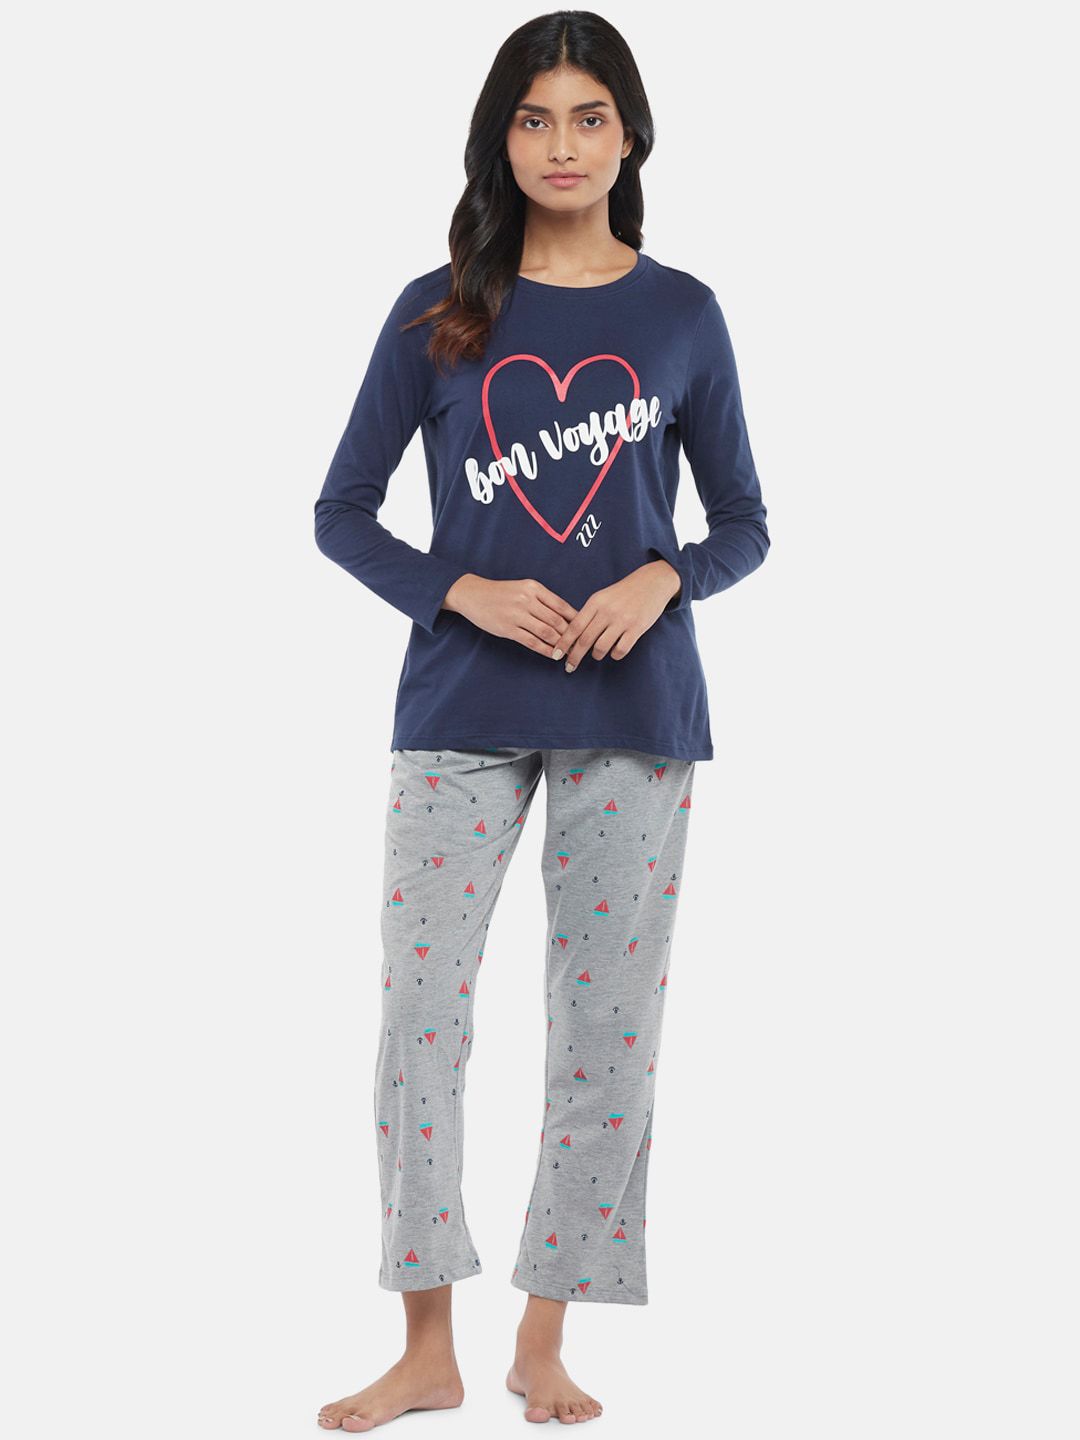 Dreamz by Pantaloons Women Navy Blue & Grey Printed Cotton Night suit Price in India